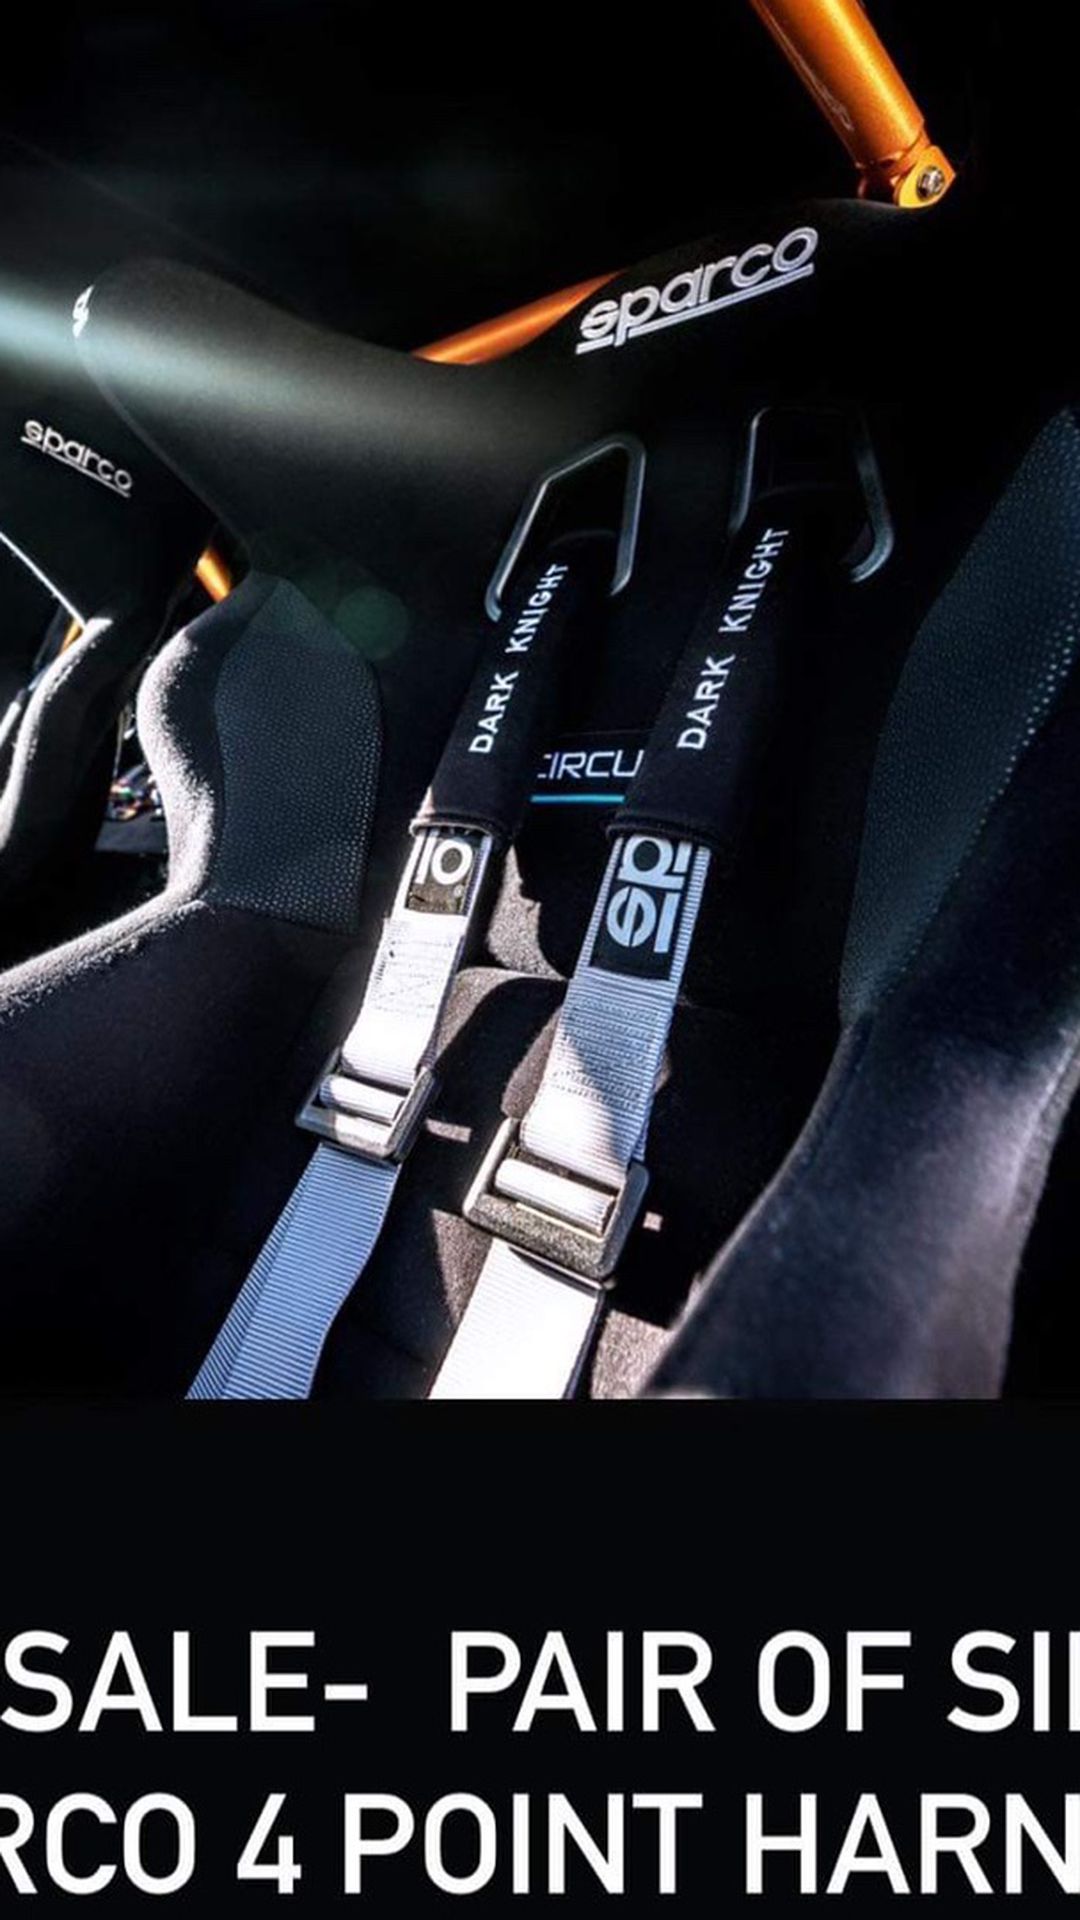 Sparco 4 Point Harnesses